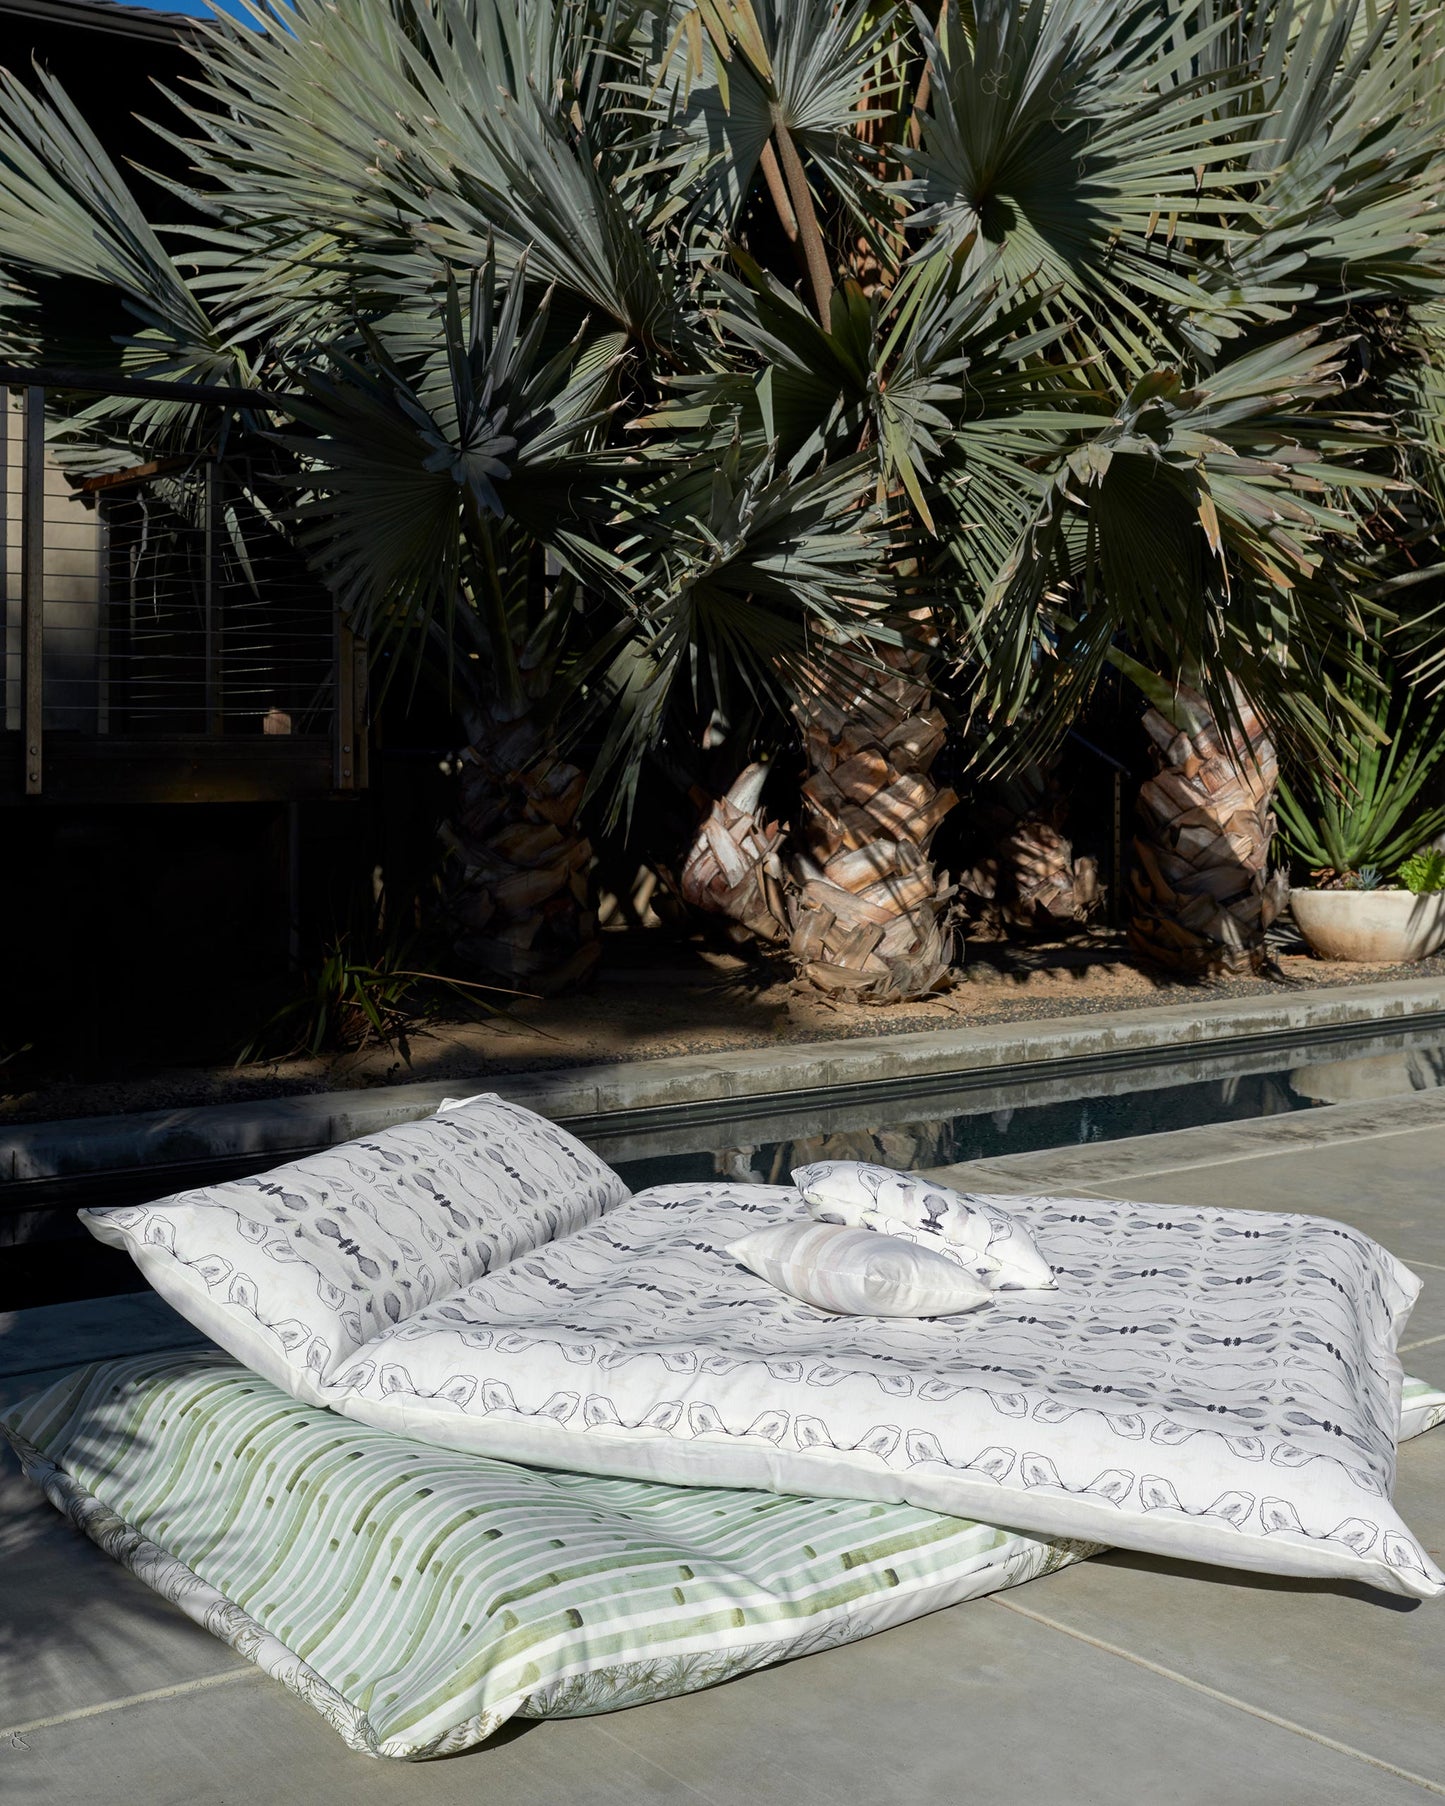 A Bali Stripe Performance Fabric Sand luxury pillow next to a palm tree in Bali